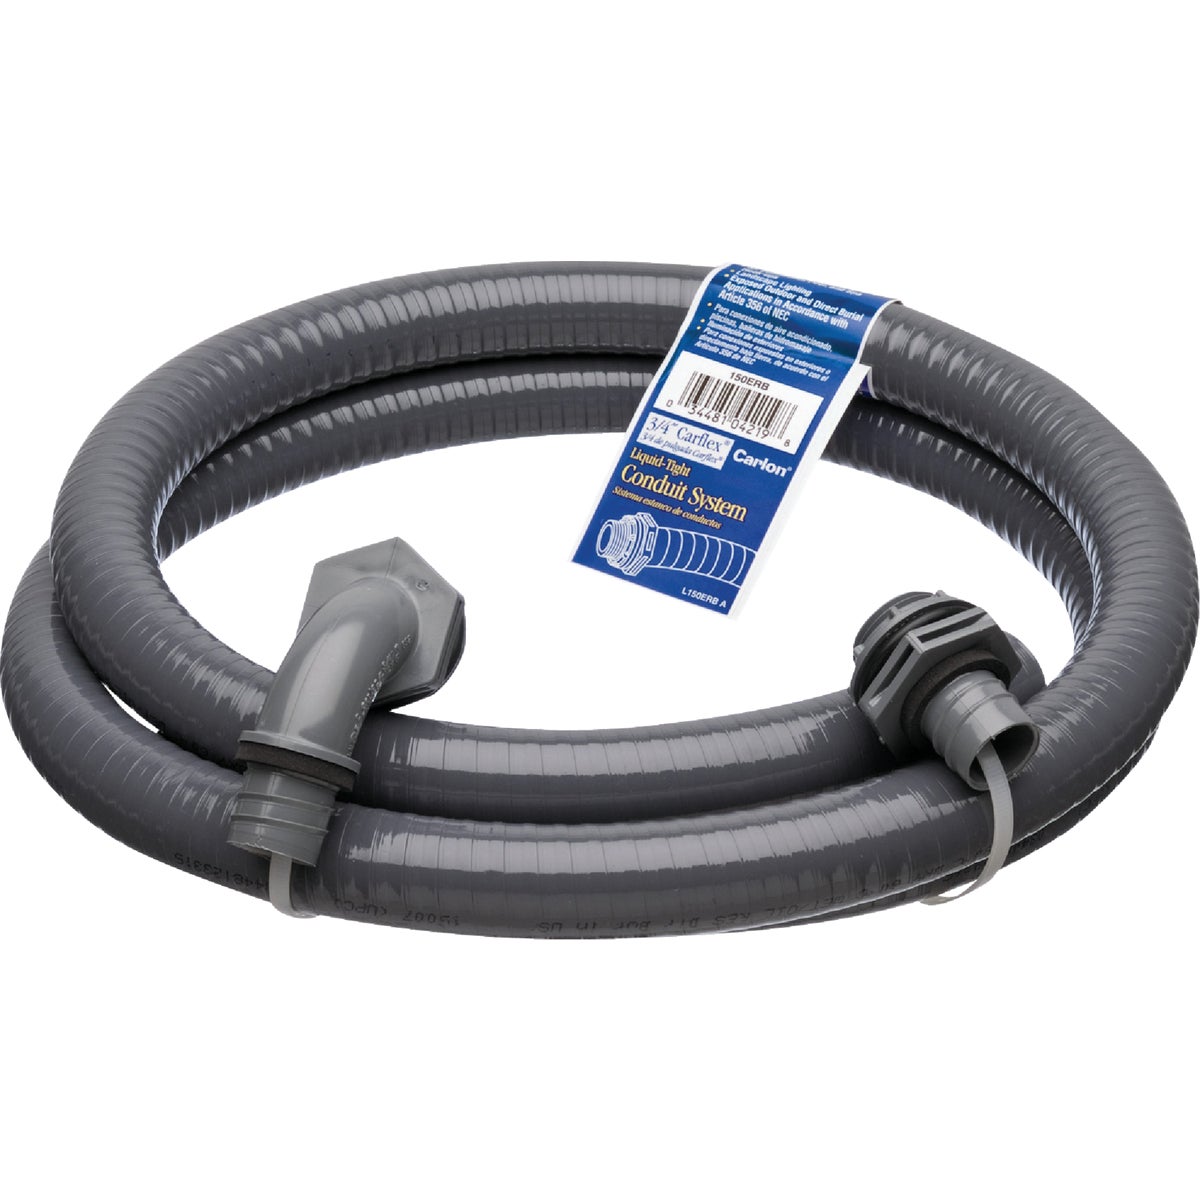 Item 523925, Carflex non-metallic kit provides protection for outdoor electrical 